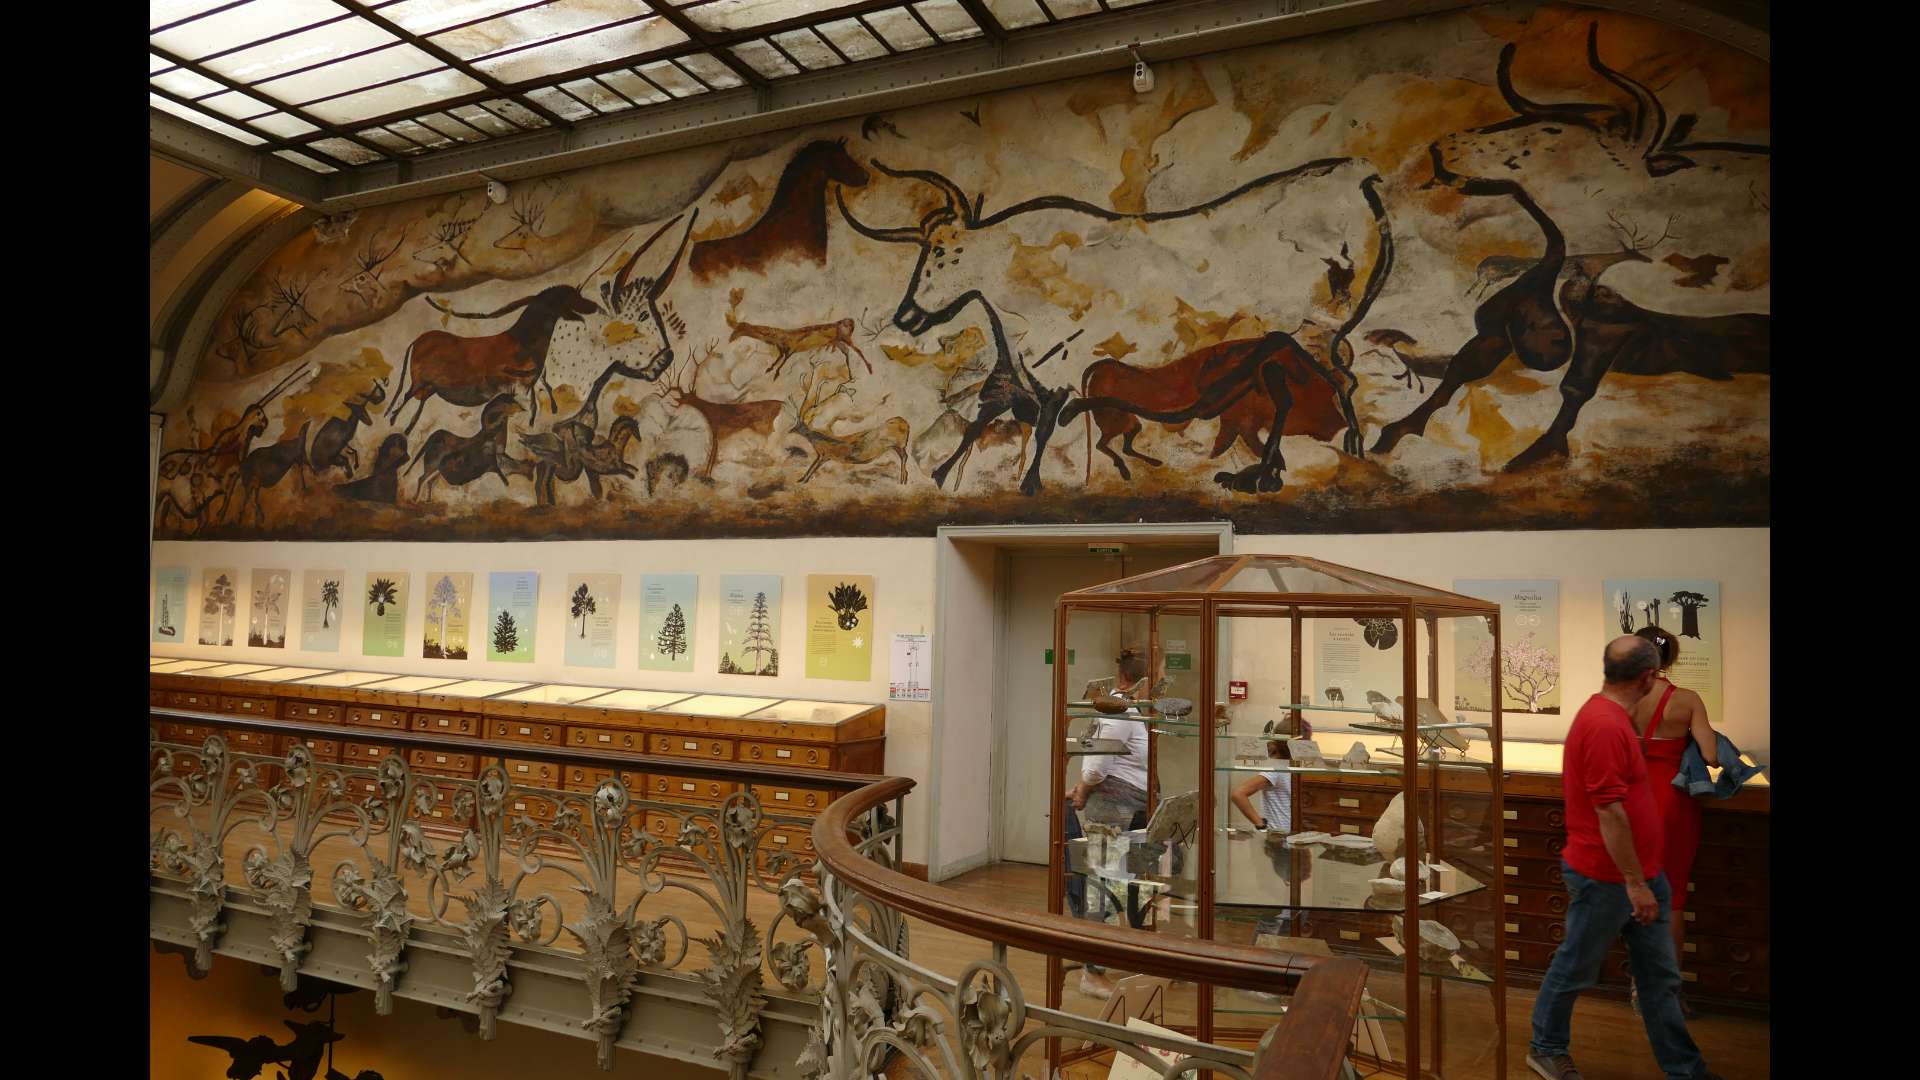 Copy of the Great Hall of the Bulls wall painting in Lascaux Cave on the balcony on the second level of the Gallery of Palaeontology in the National Museum of Natural History in Paris. Photo copyright: Sophie Cattoire